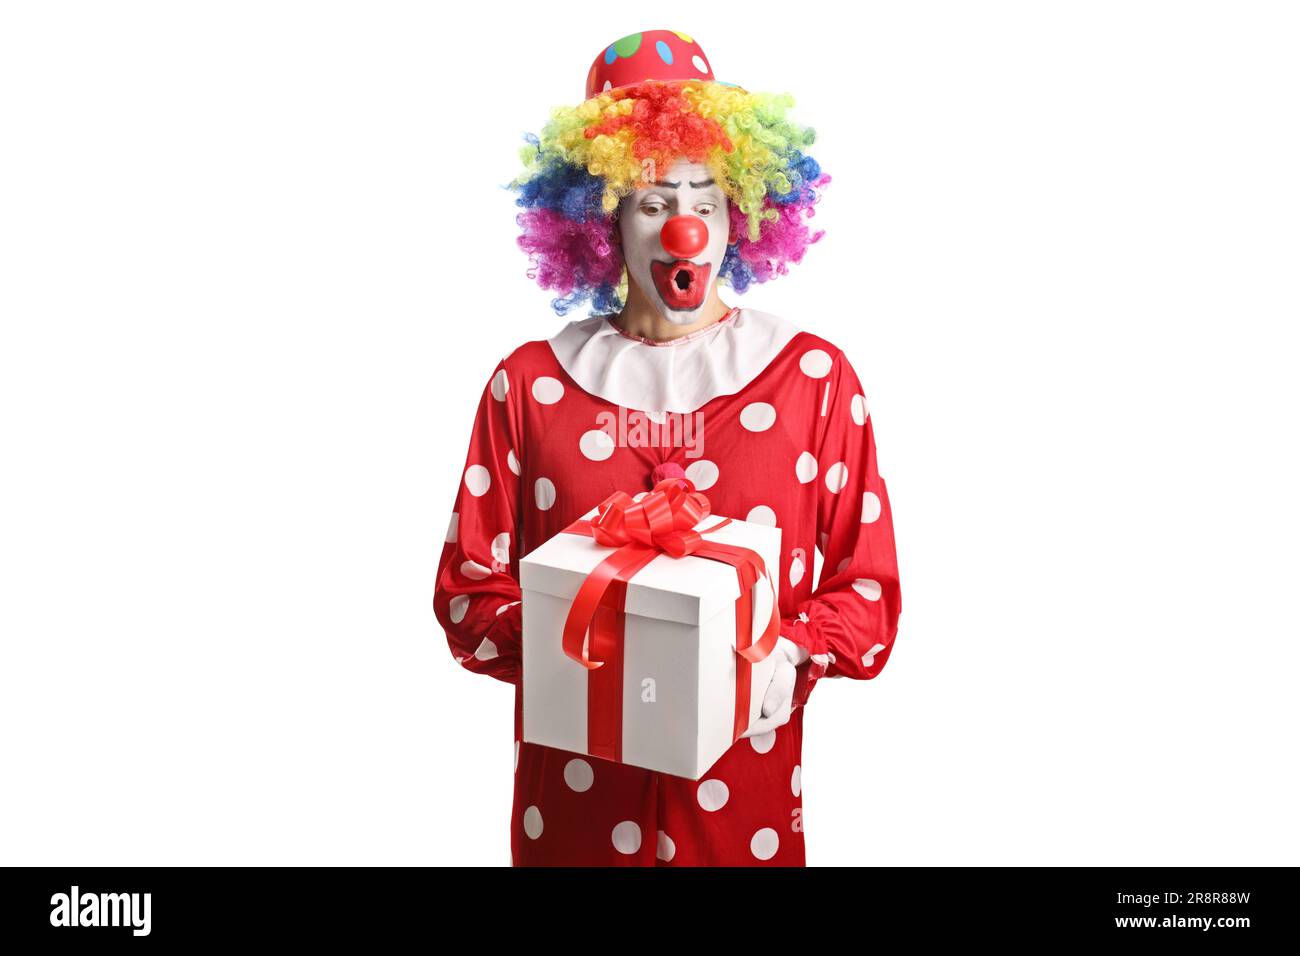 Clown in a red costume holding a present box isolated on white background Stock Photo